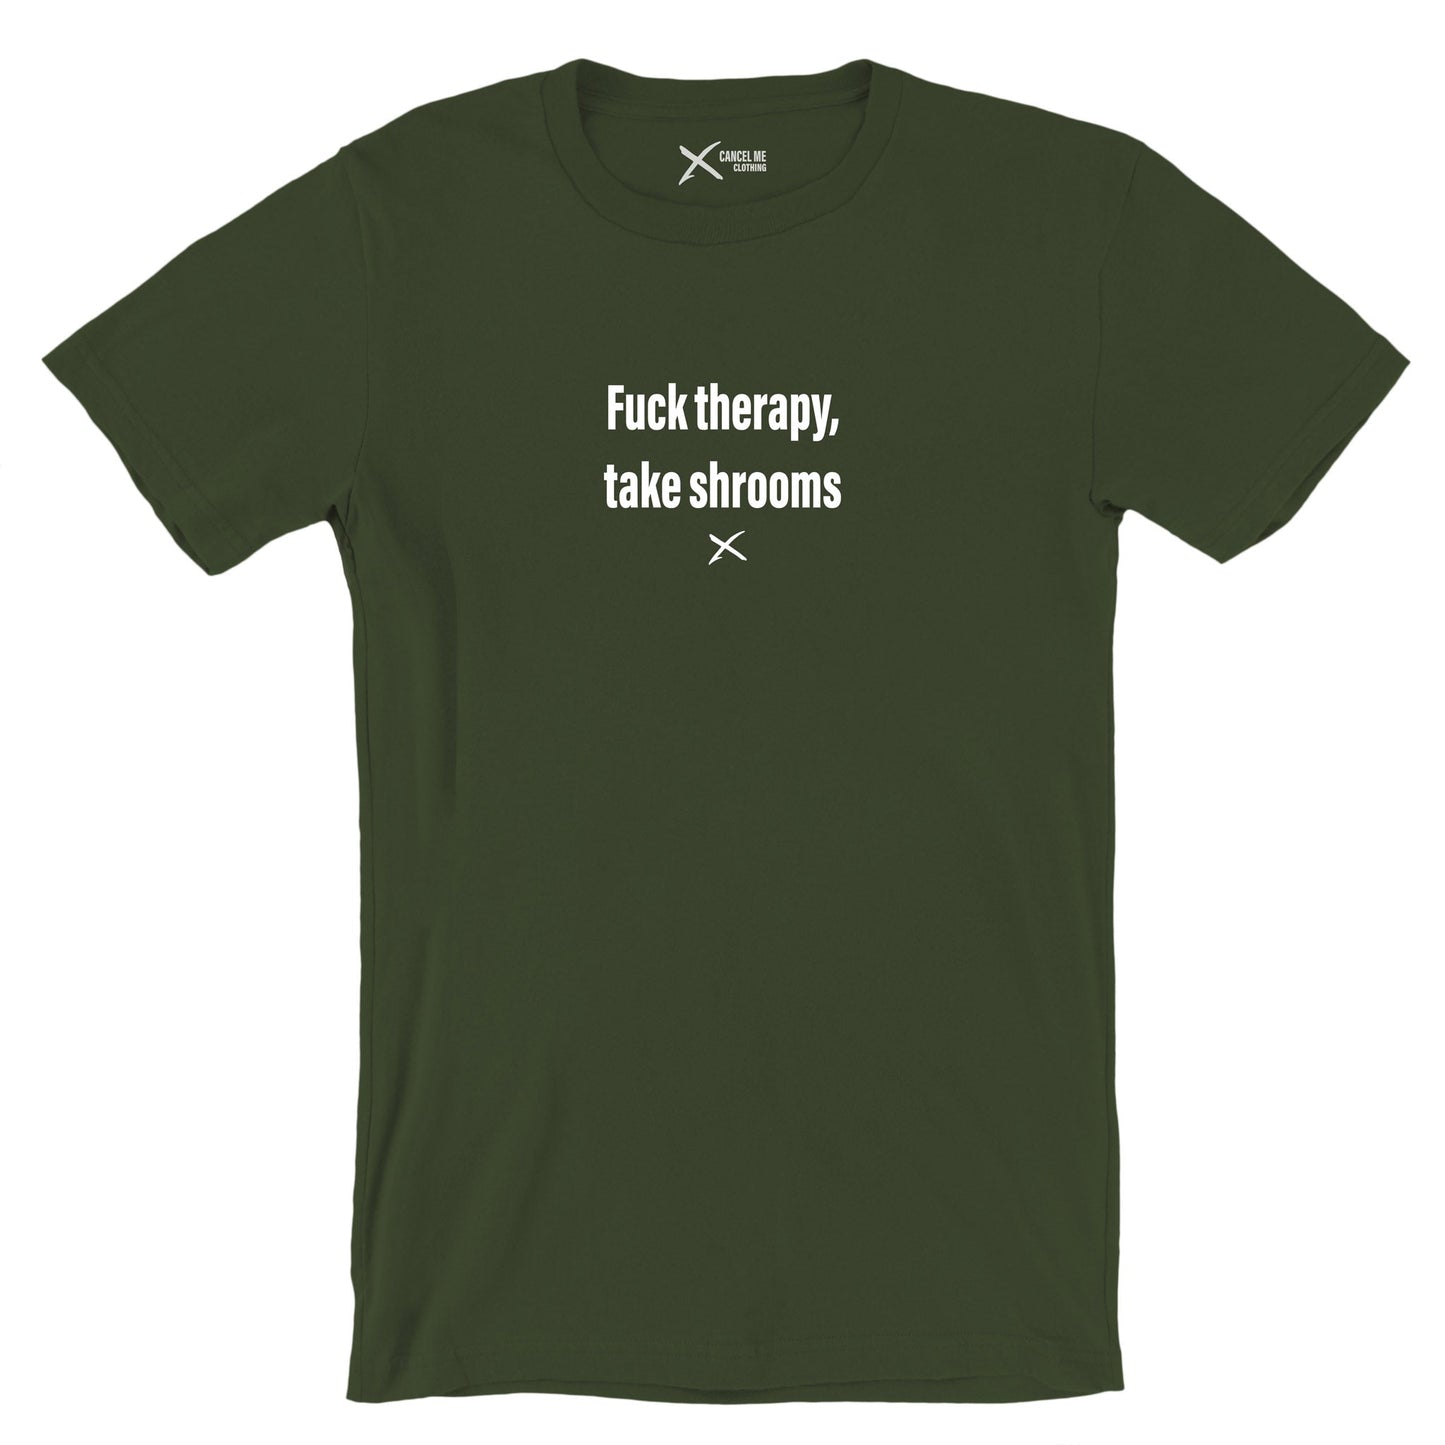 Fuck therapy, take shrooms - Shirt